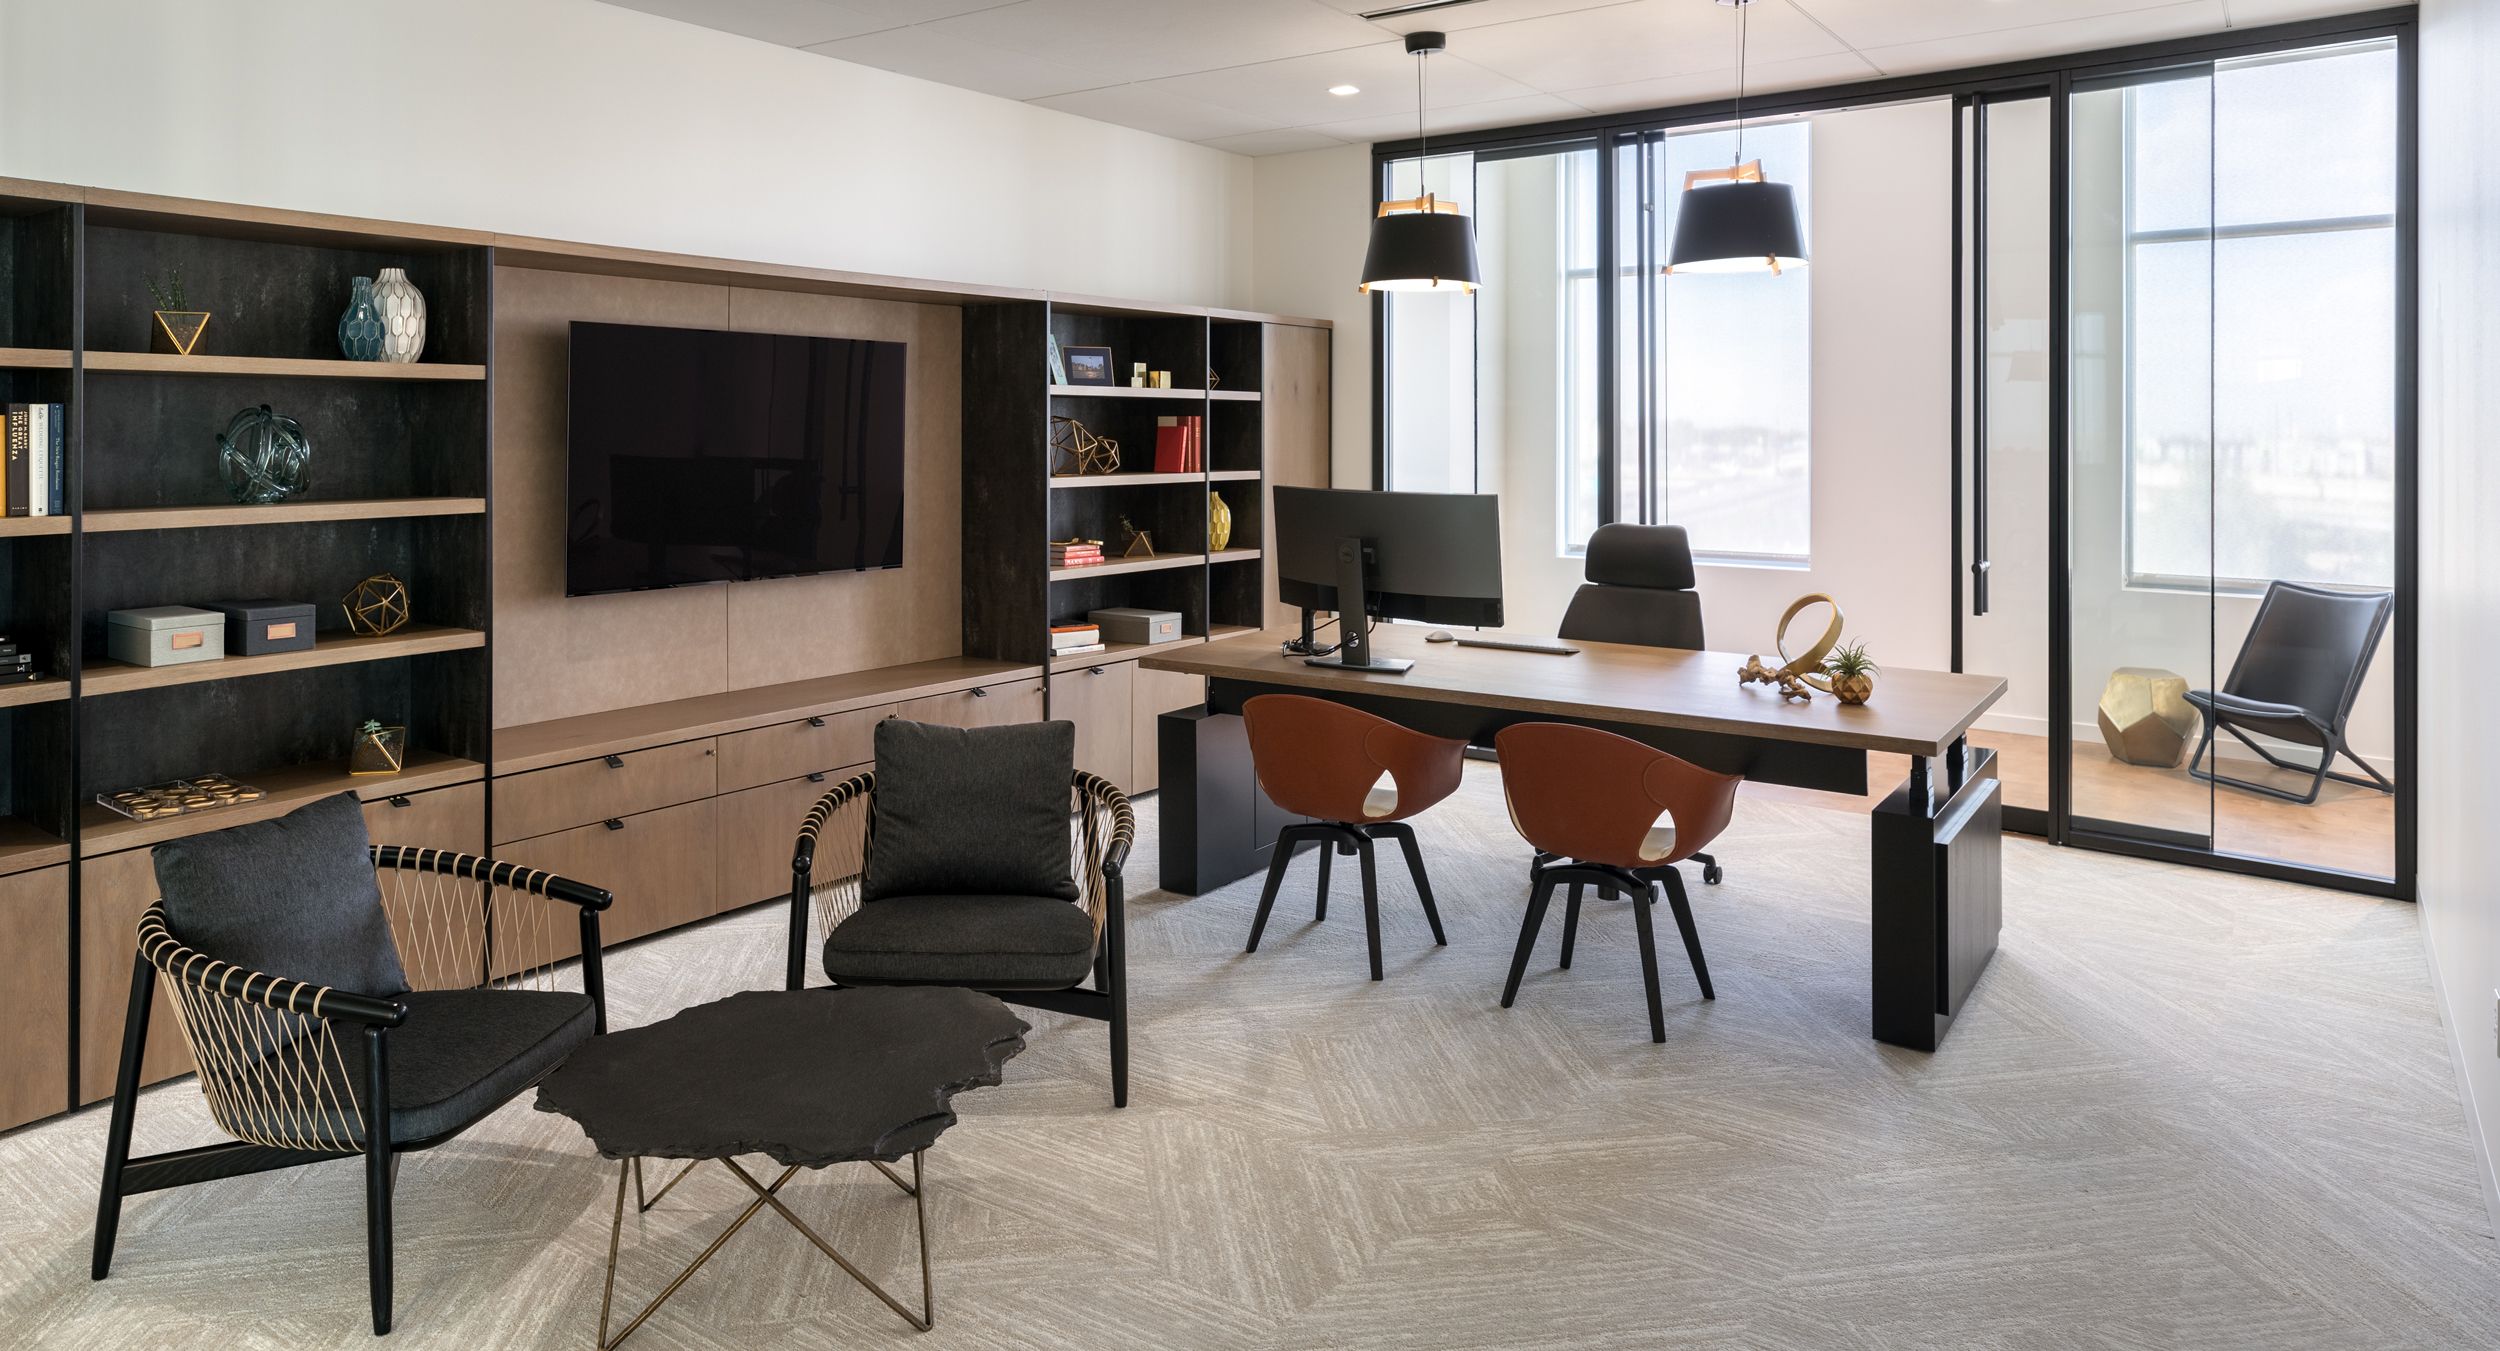 Our custom furniture for BPX was designed to create a workplace that also feels like home.